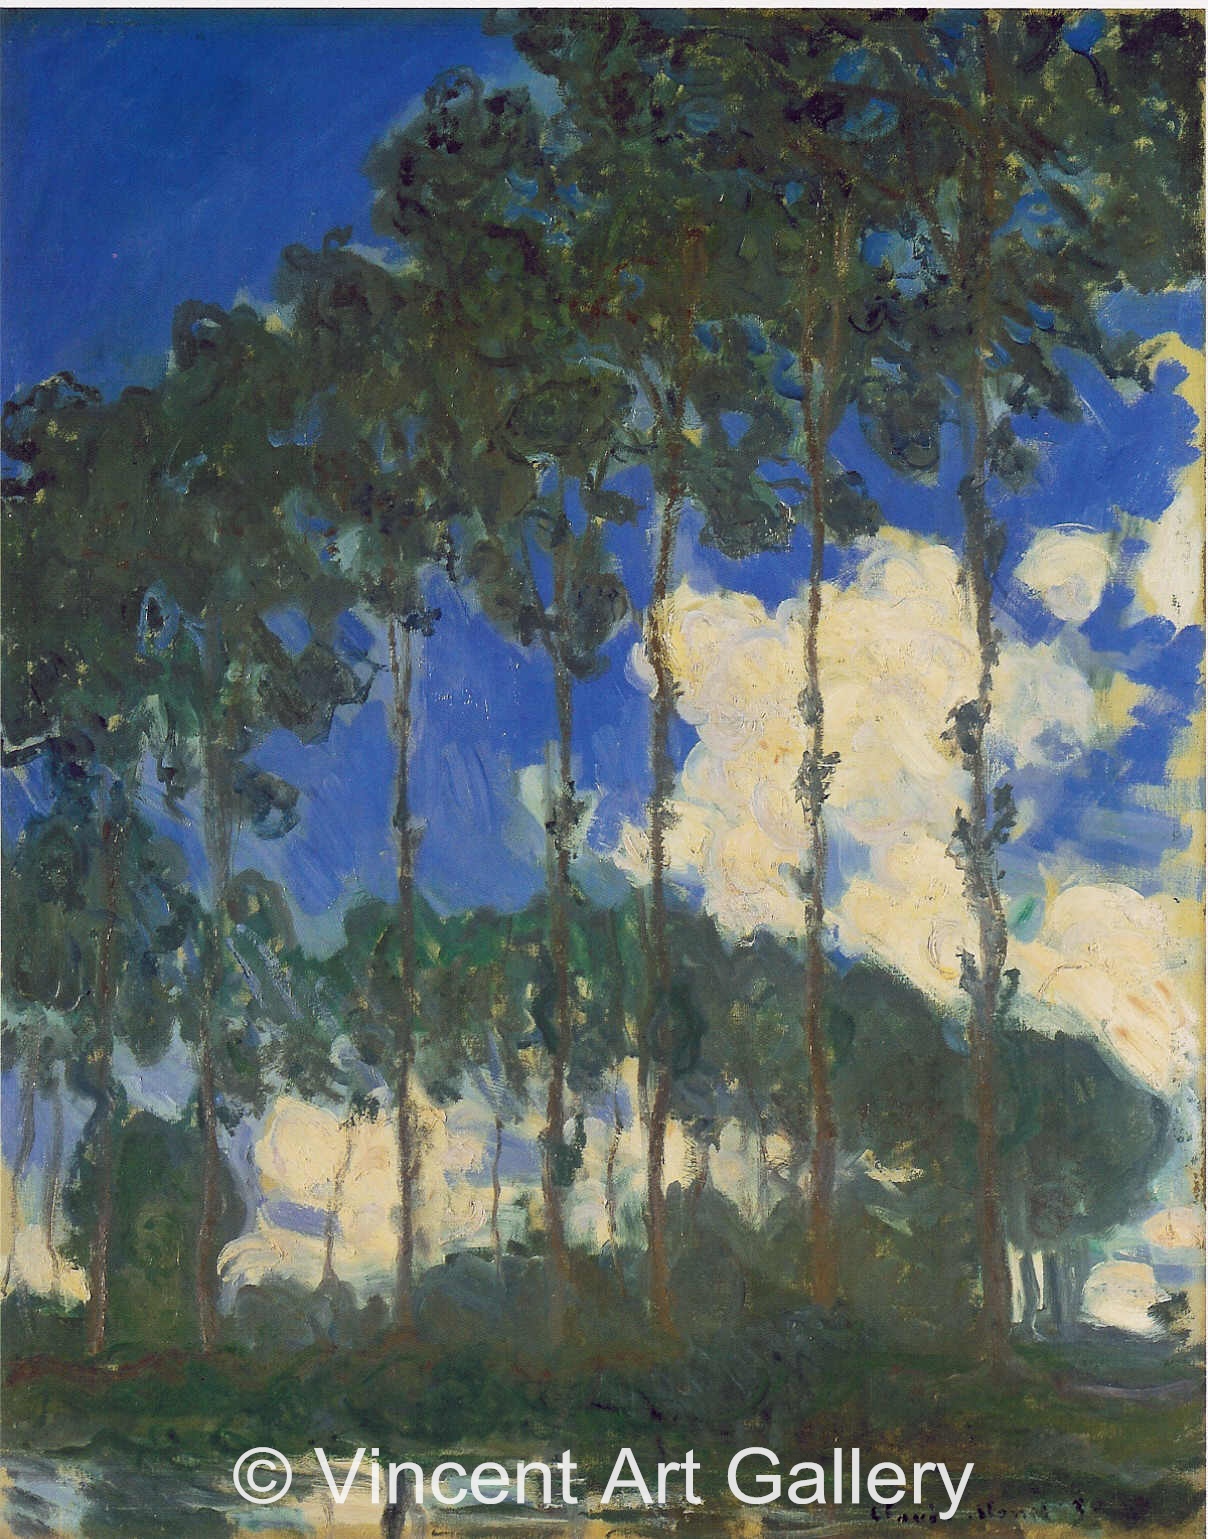 A2795, MONET, Poplars on the Banks of the River Epte